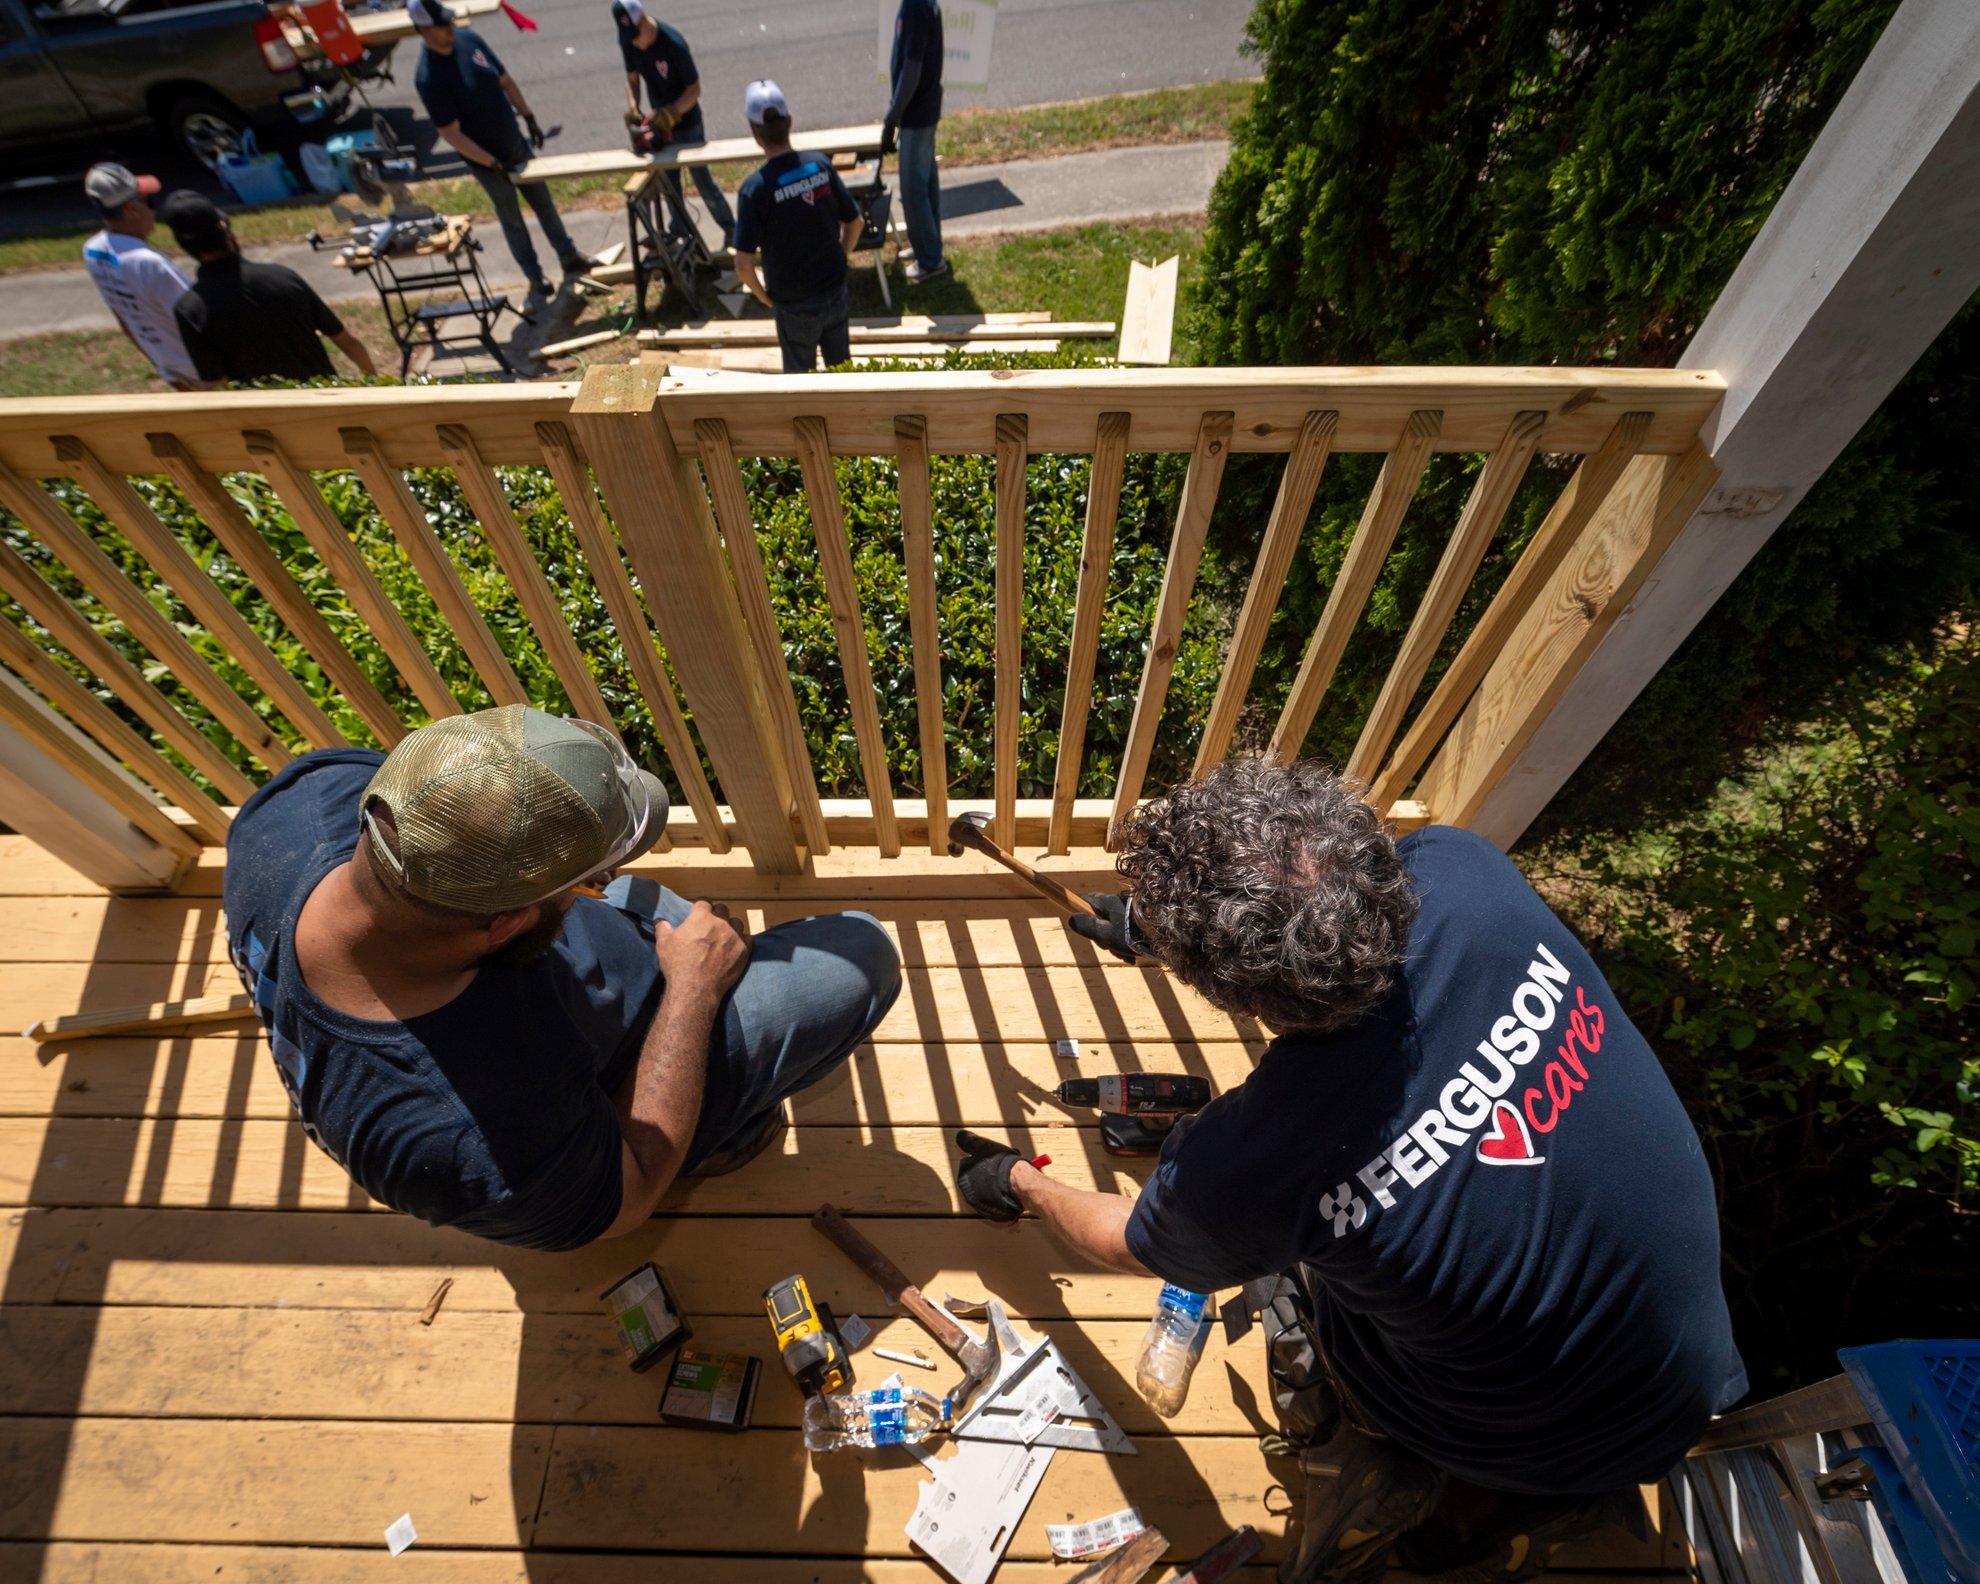 Two associates wearing Ferguson Cares T-shirts work on a wooden balcony on a residential home.